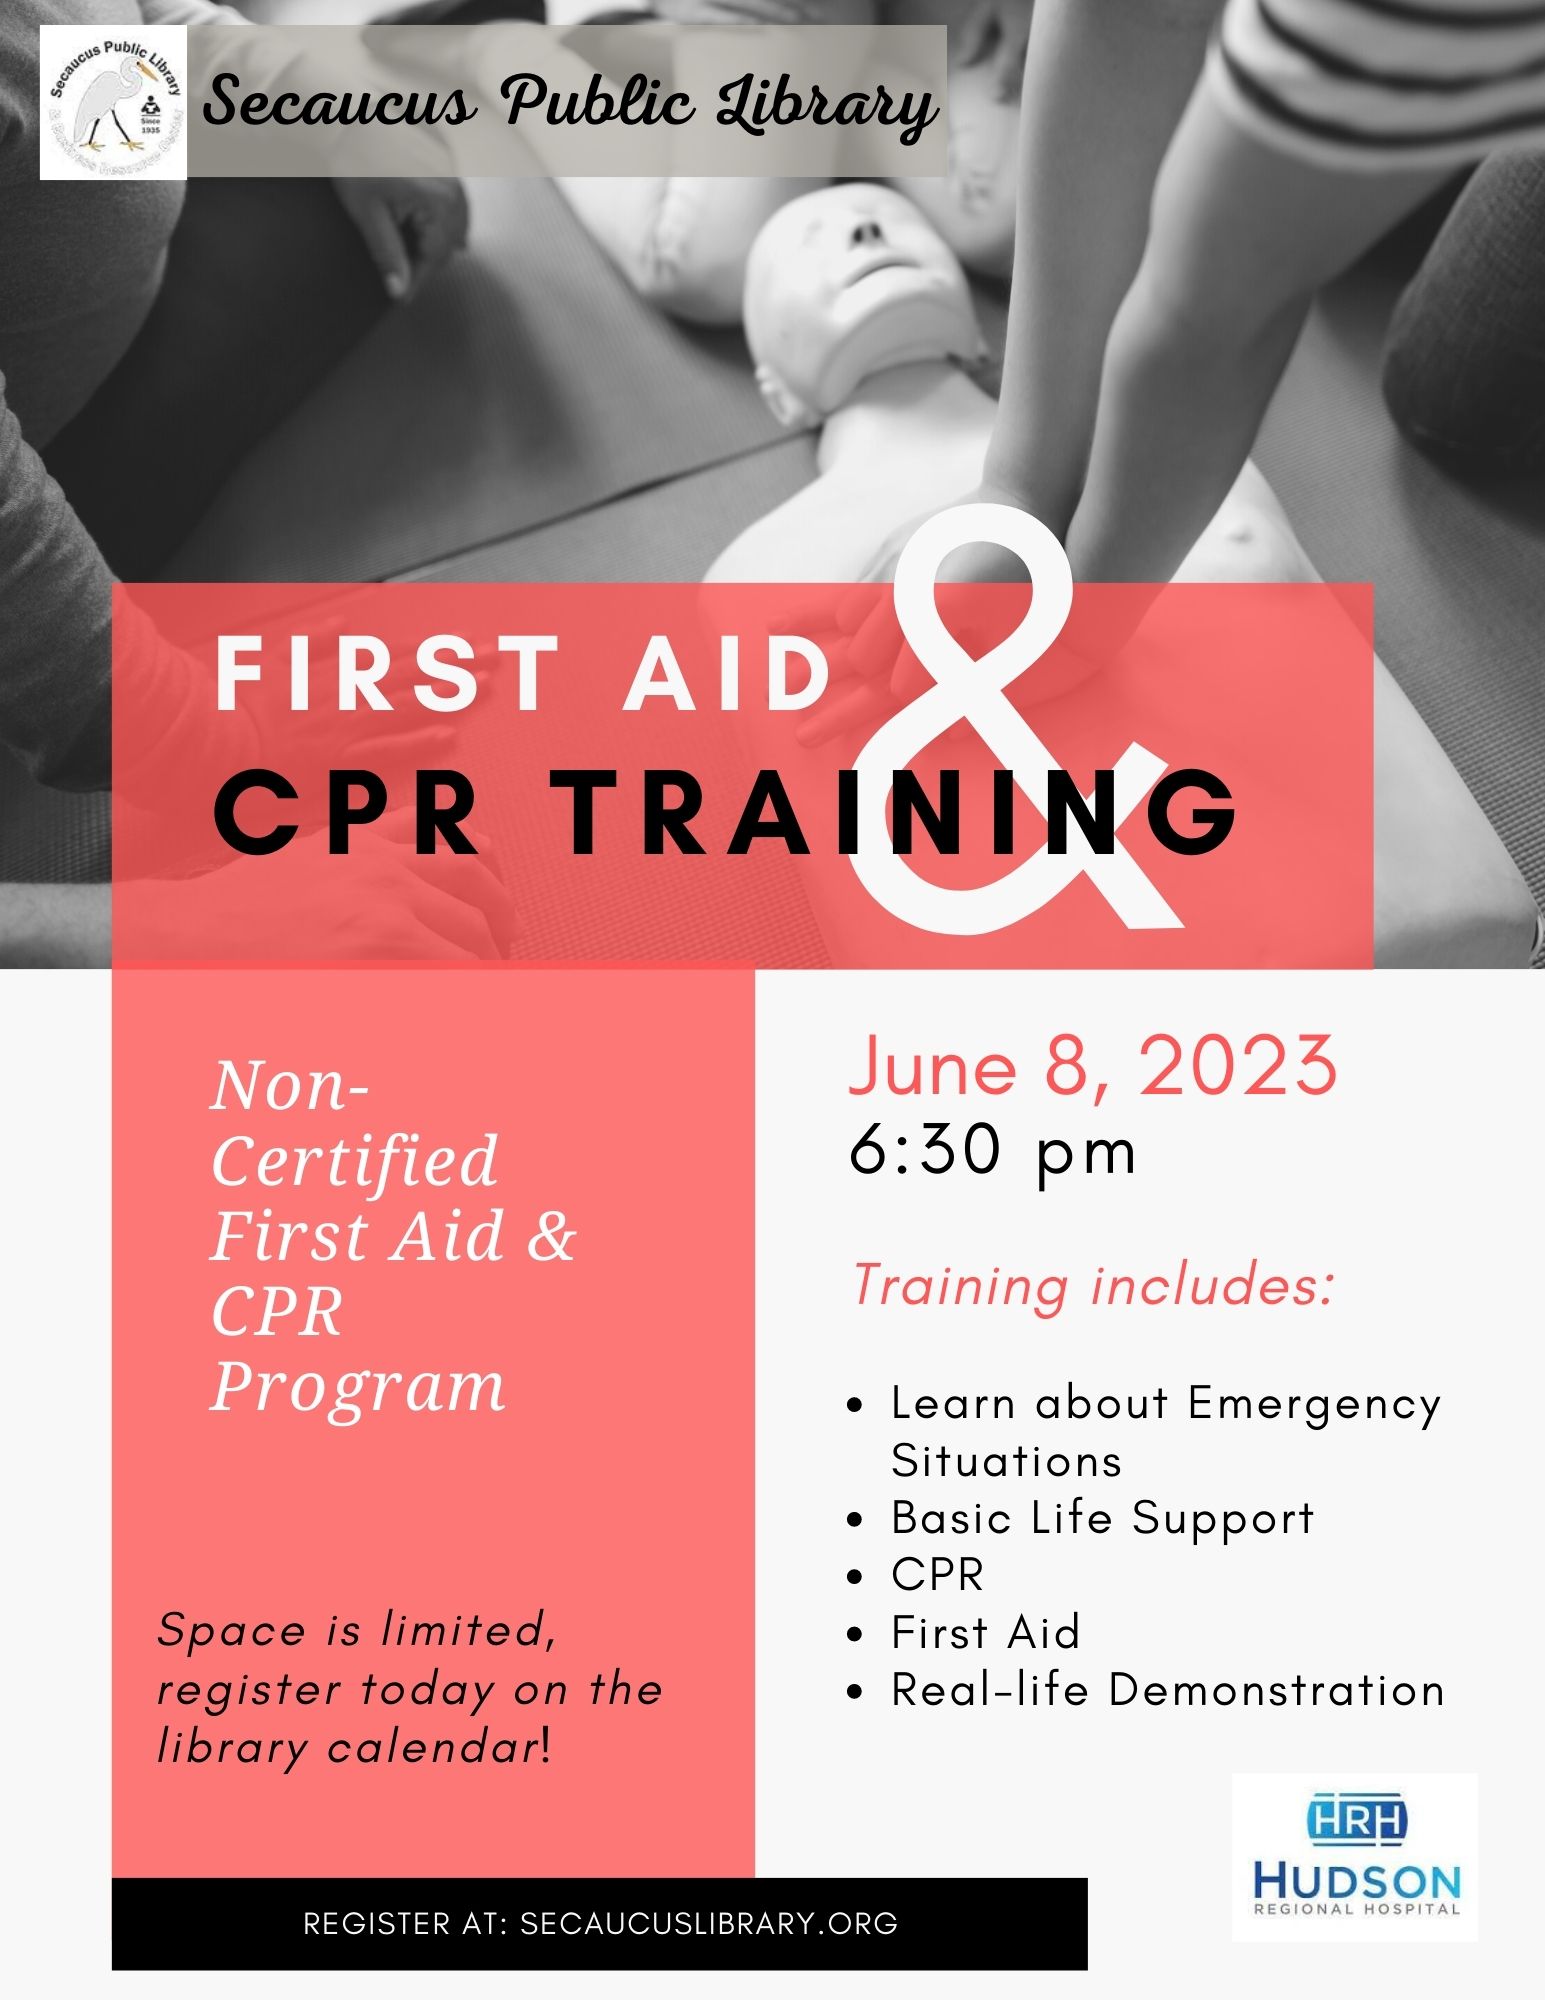 First Aid CPR Training Flyer